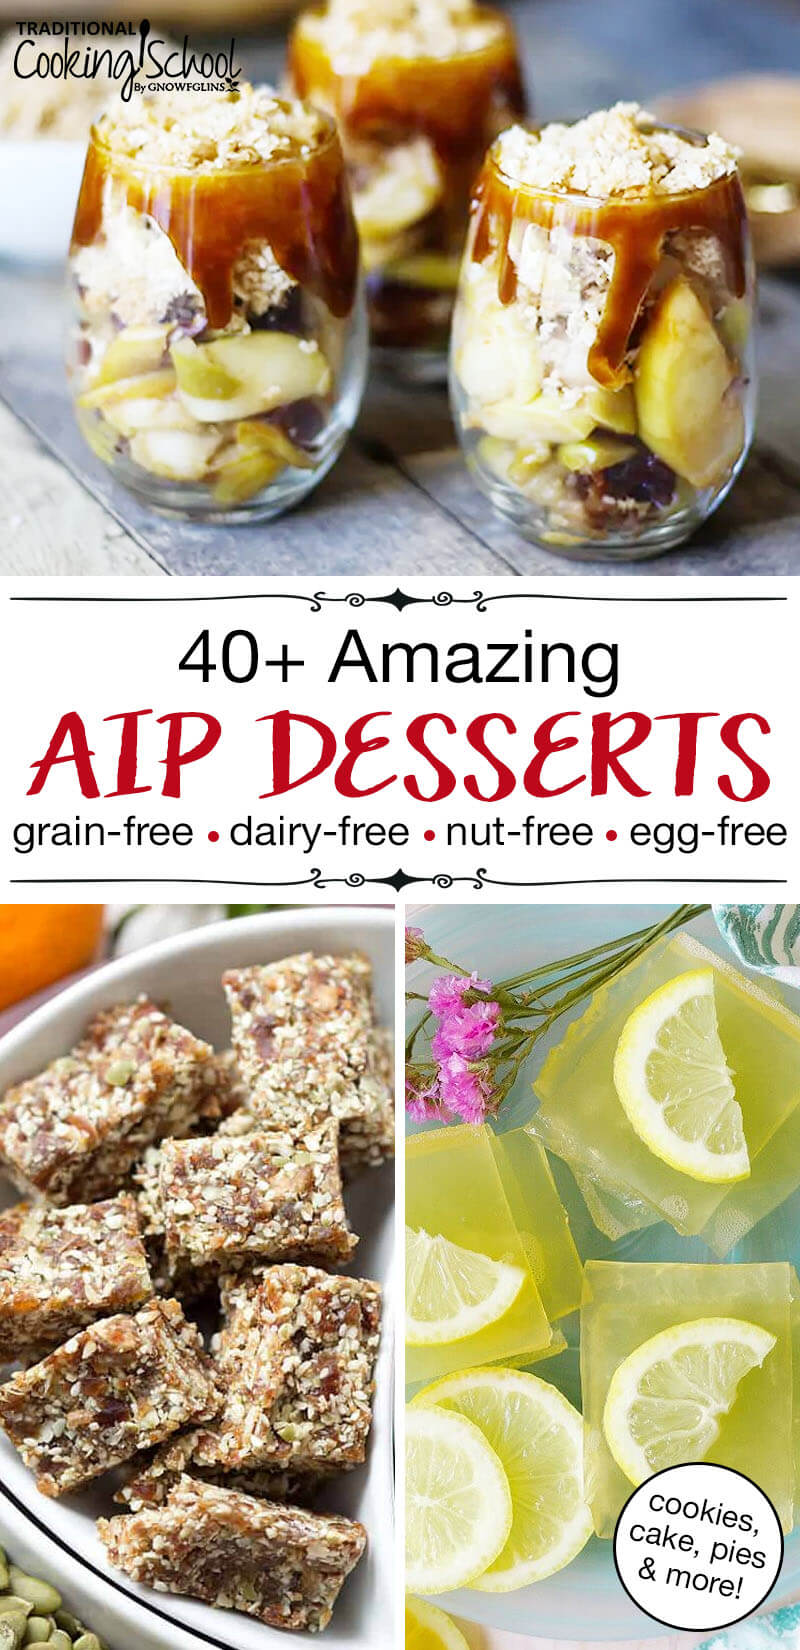 photo collage of allergy-friendly desserts including salted caramel apple parfait and lemon jello, with text overlay: "40+ Amazing AIP Desserts * Grain-Free * Dairy-Free * Nut-Free * Egg-Free (cookies, cakes, pies & more!)"